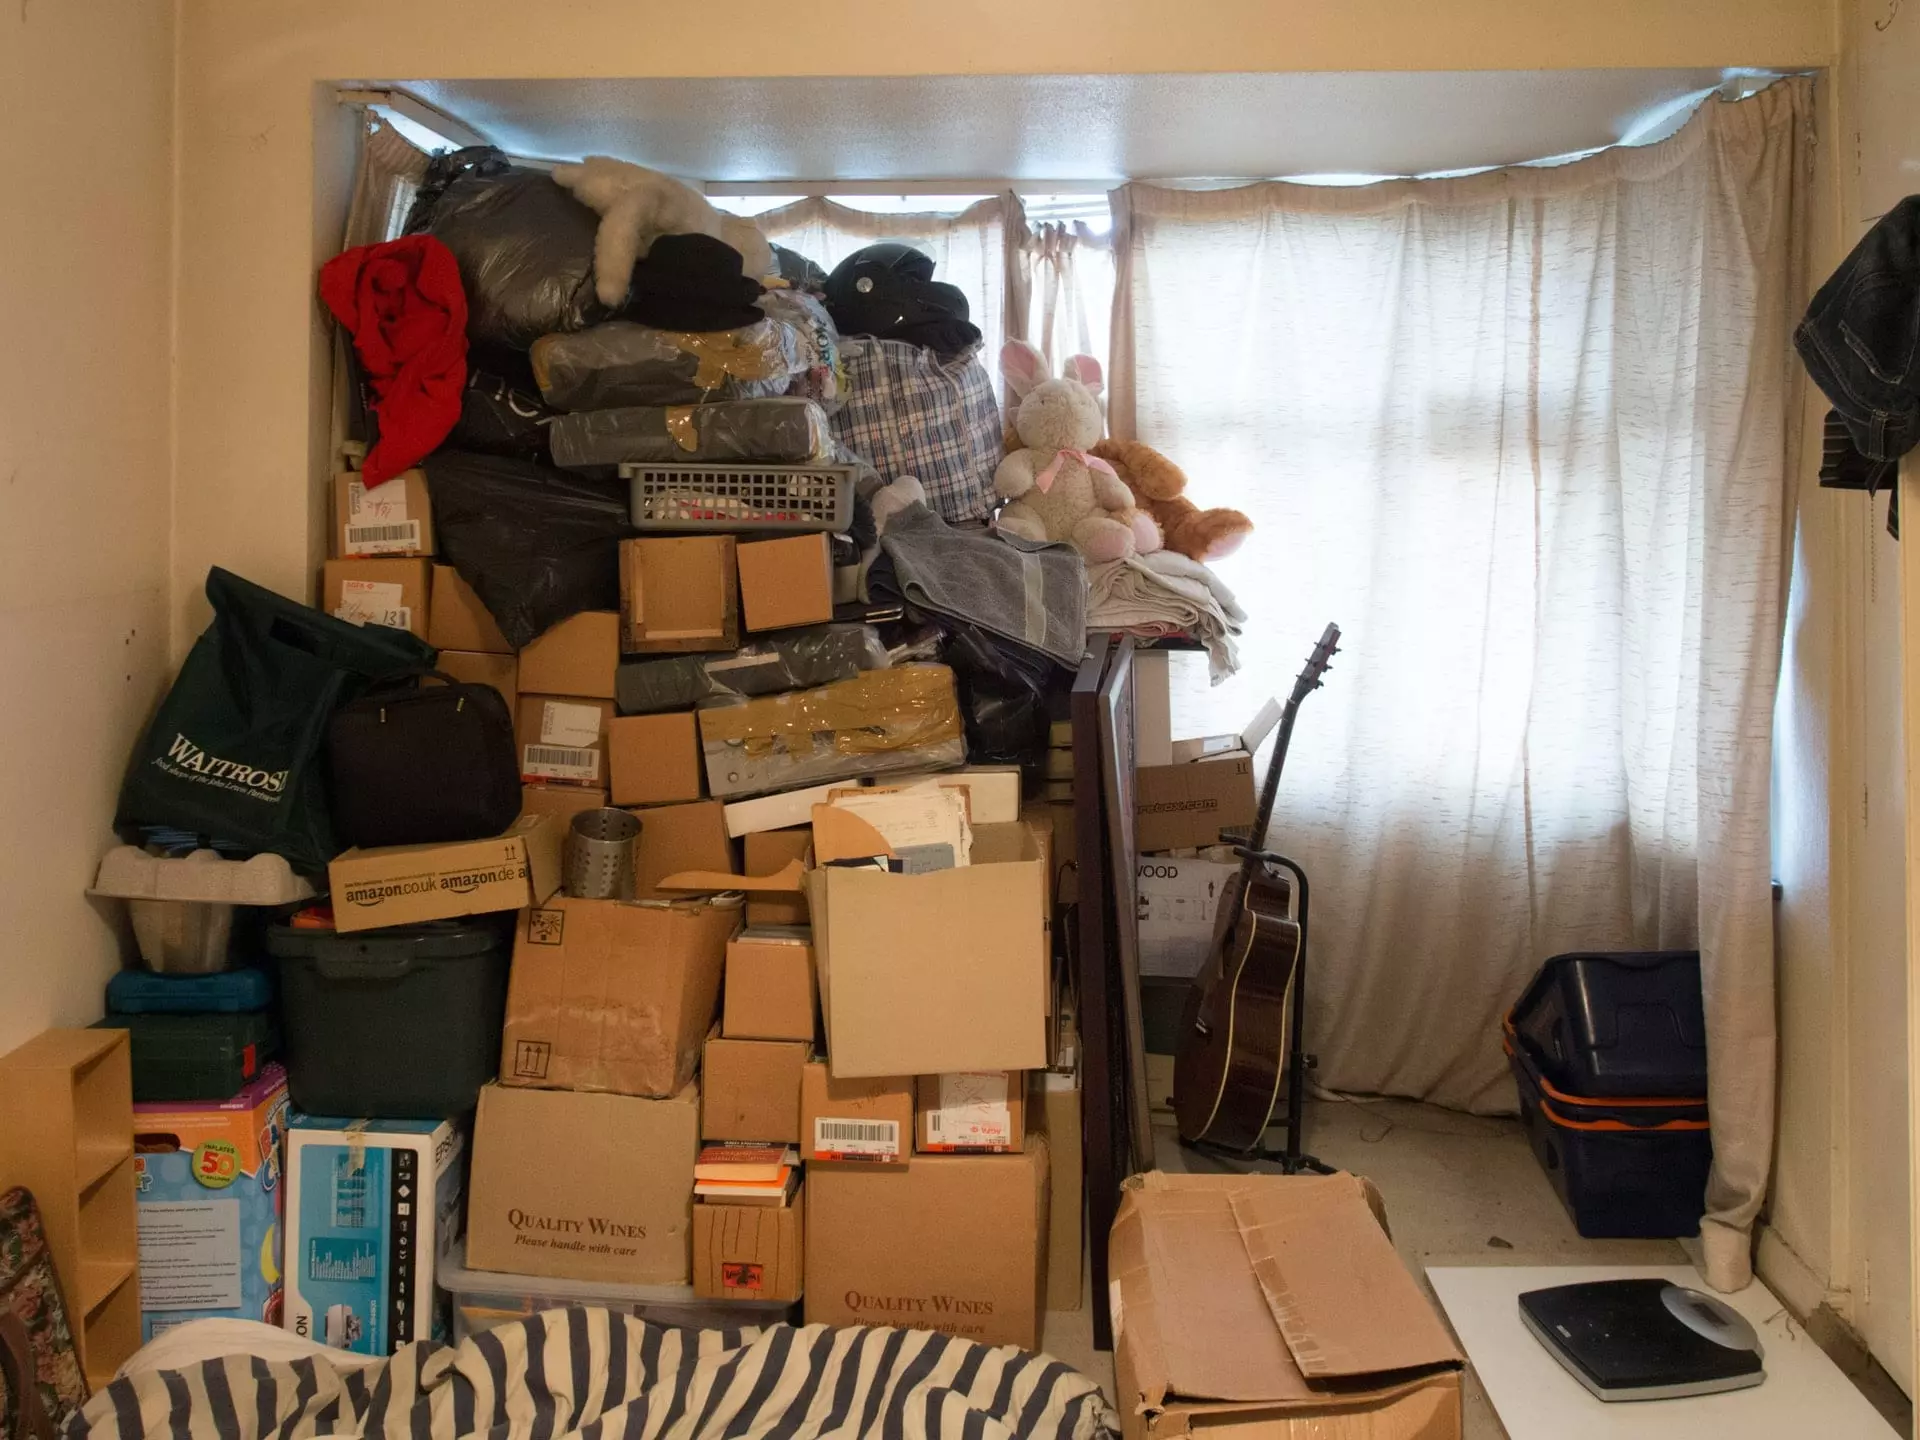 A cluttered room full of unpacked boxed